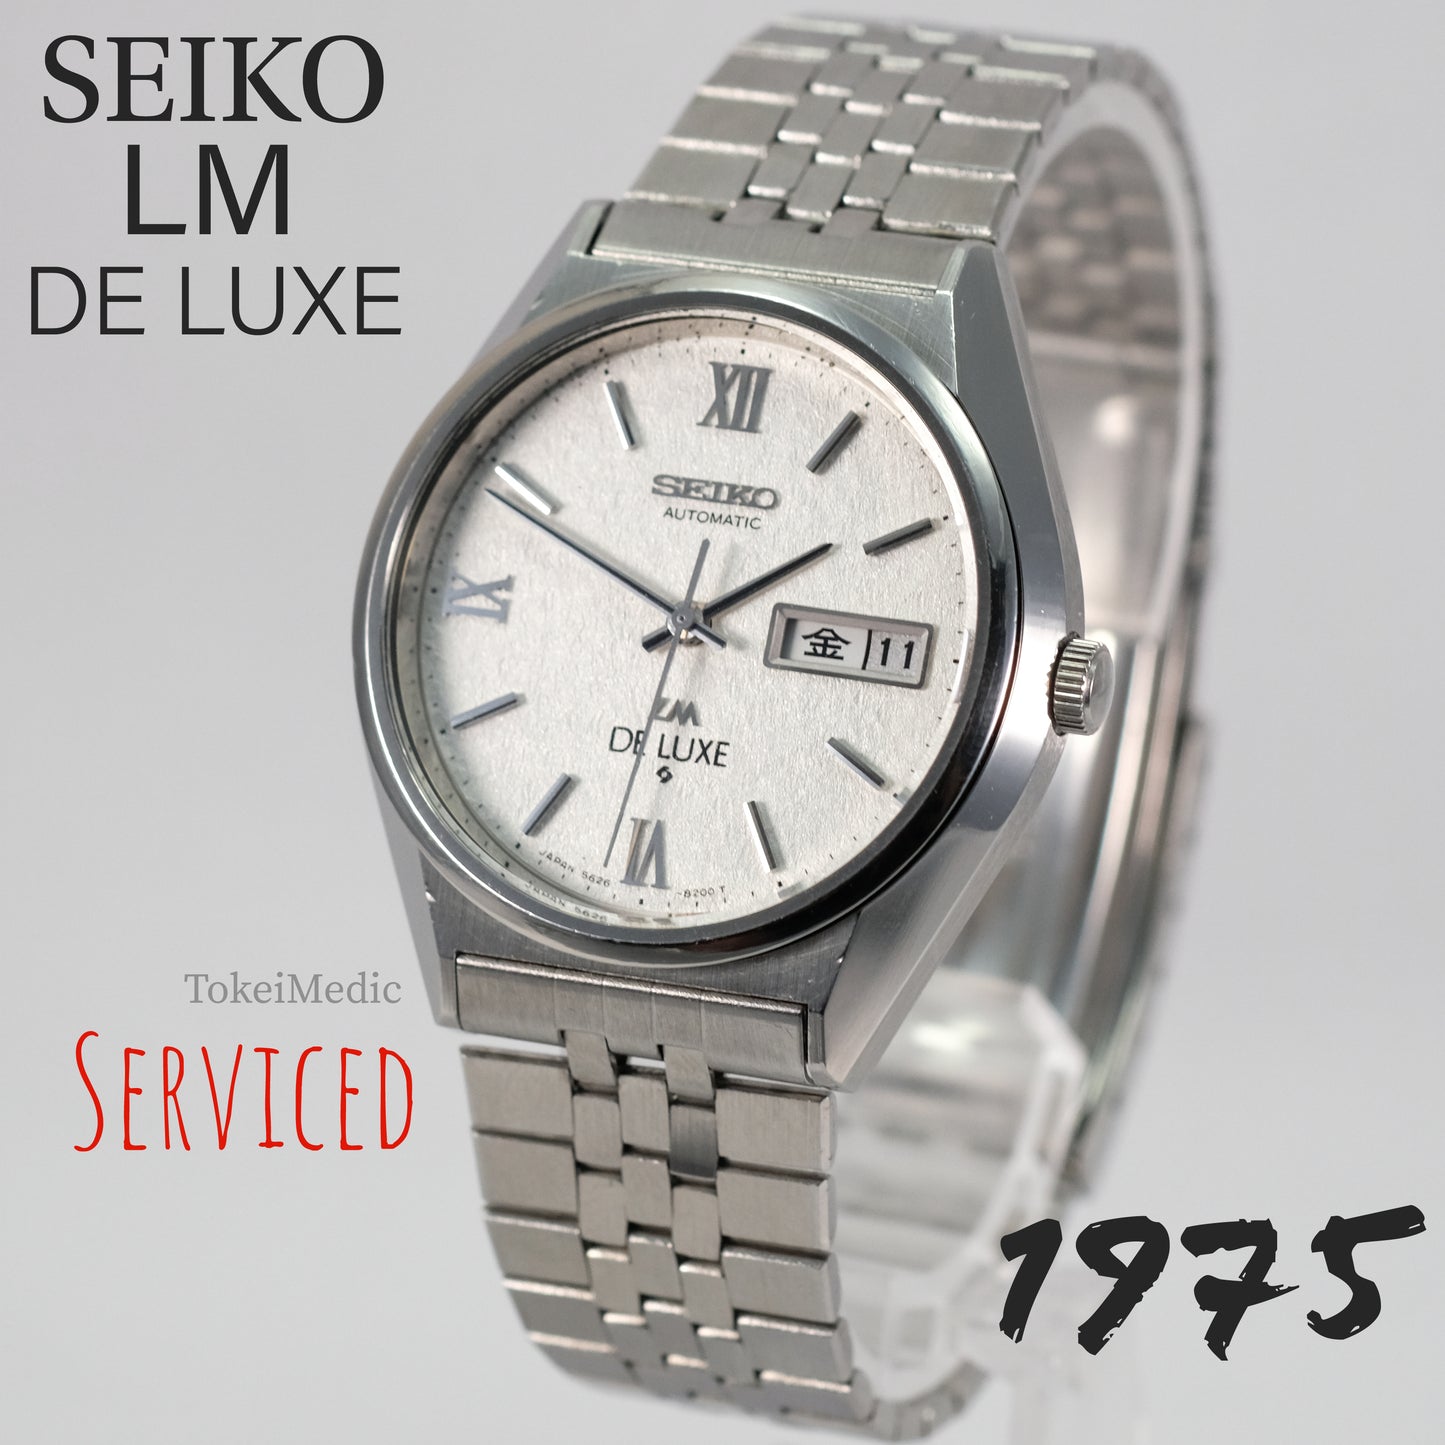 RESERVED! 1975 Seiko LM De Luxe 5626-8160